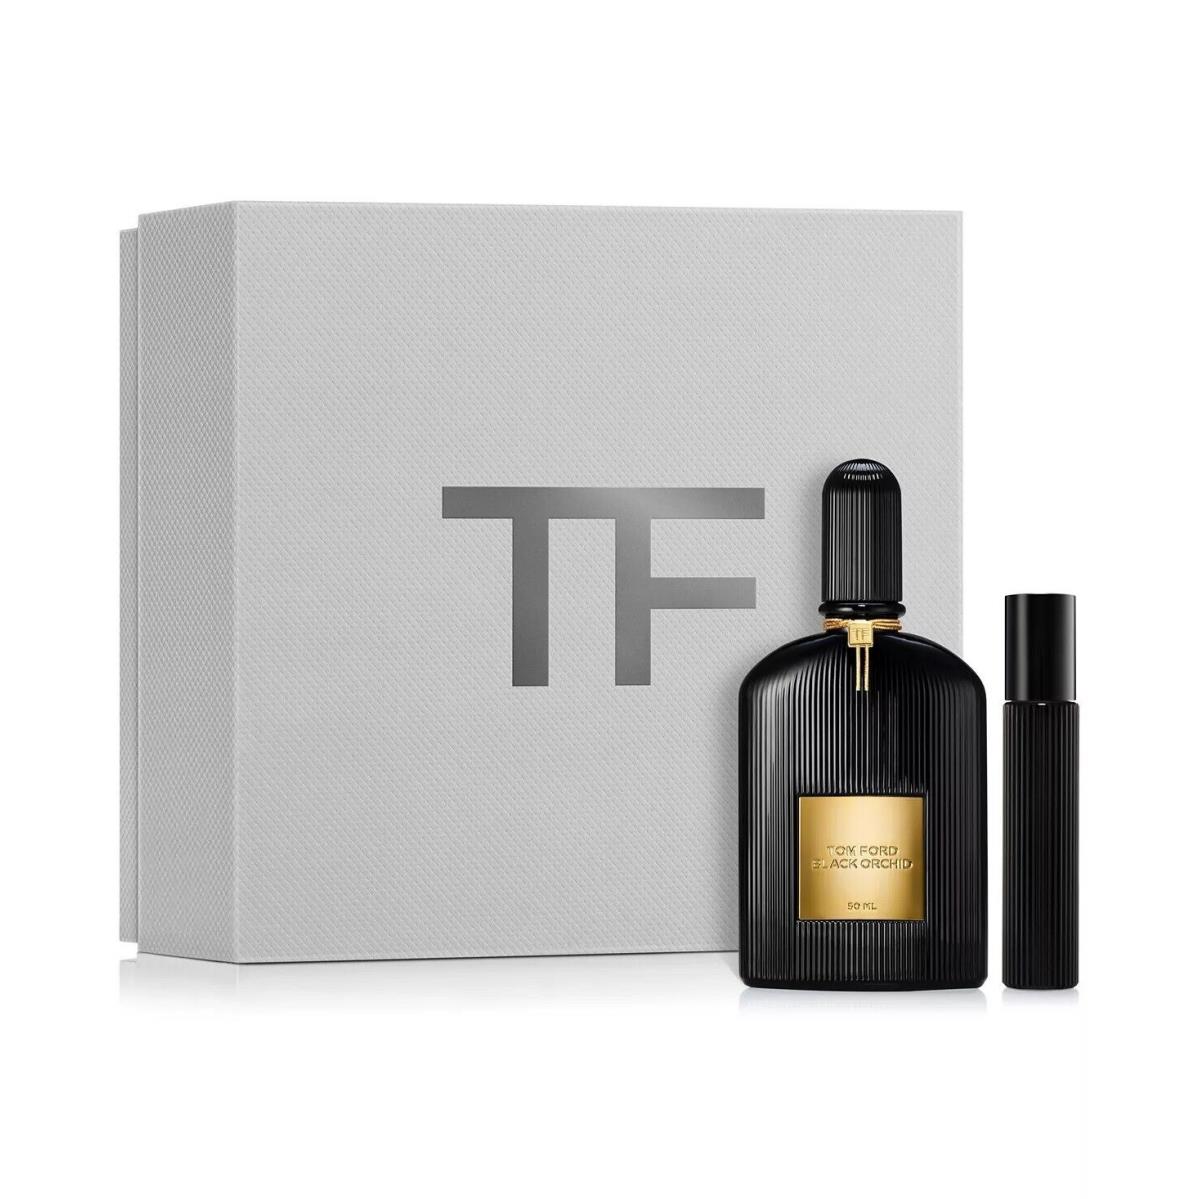 Tom Ford Black Orchid Collection 1.7 Edp SP + .34 OZ Edp SP Gift Set Women